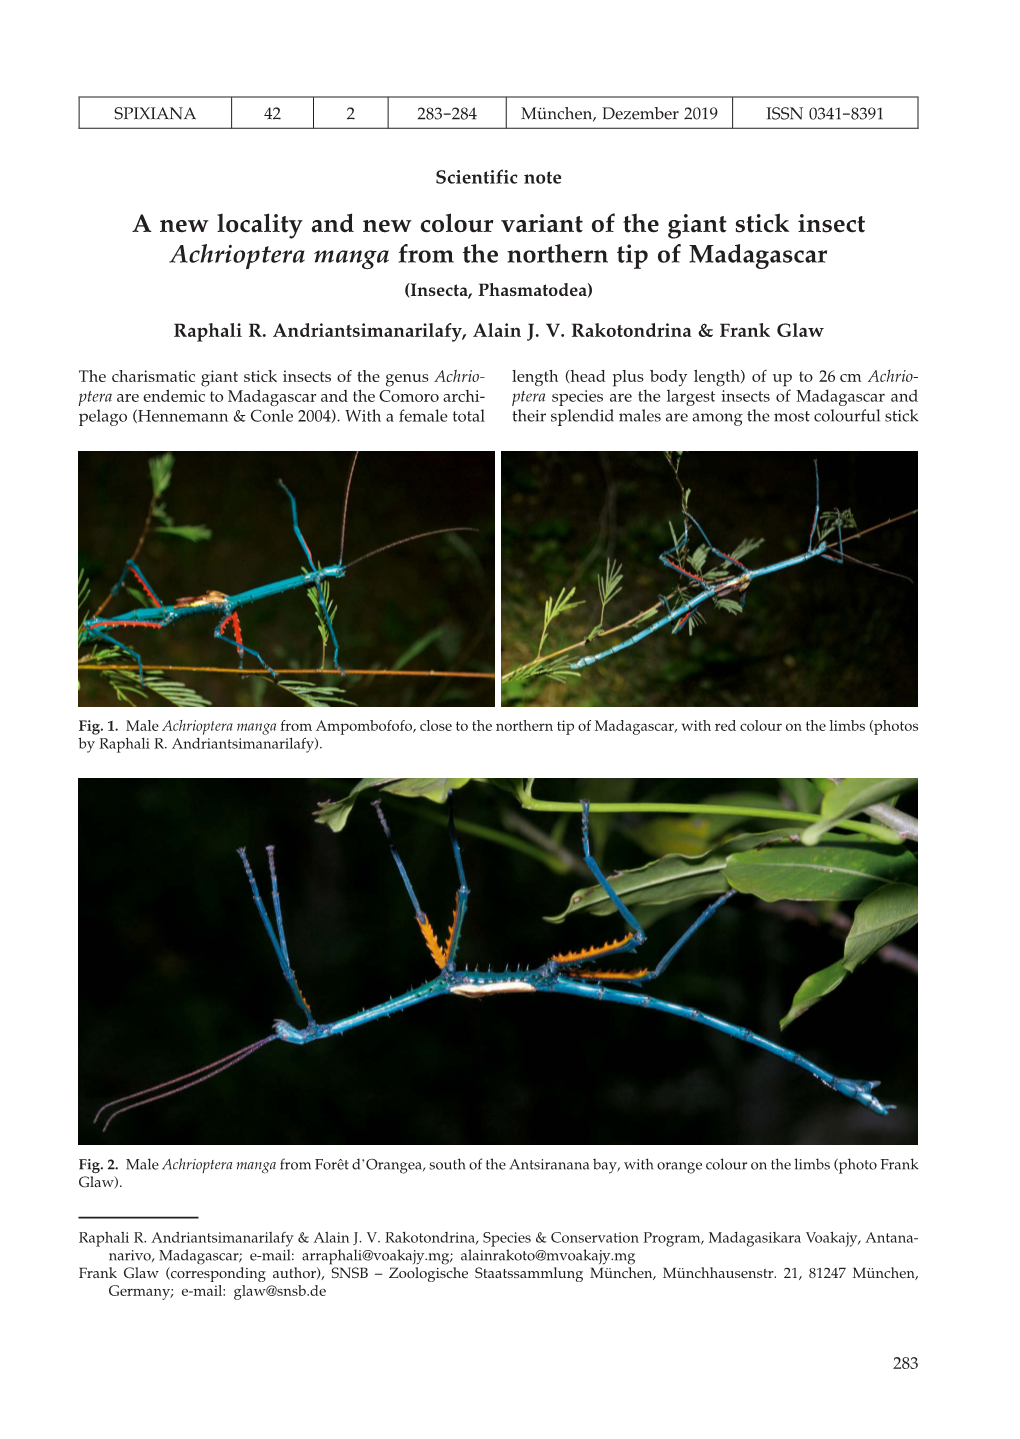 A New Locality and New Colour Variant of the Giant Stick Insect Achrioptera Manga from the Northern Tip of Madagascar (Insecta, Phasmatodea)